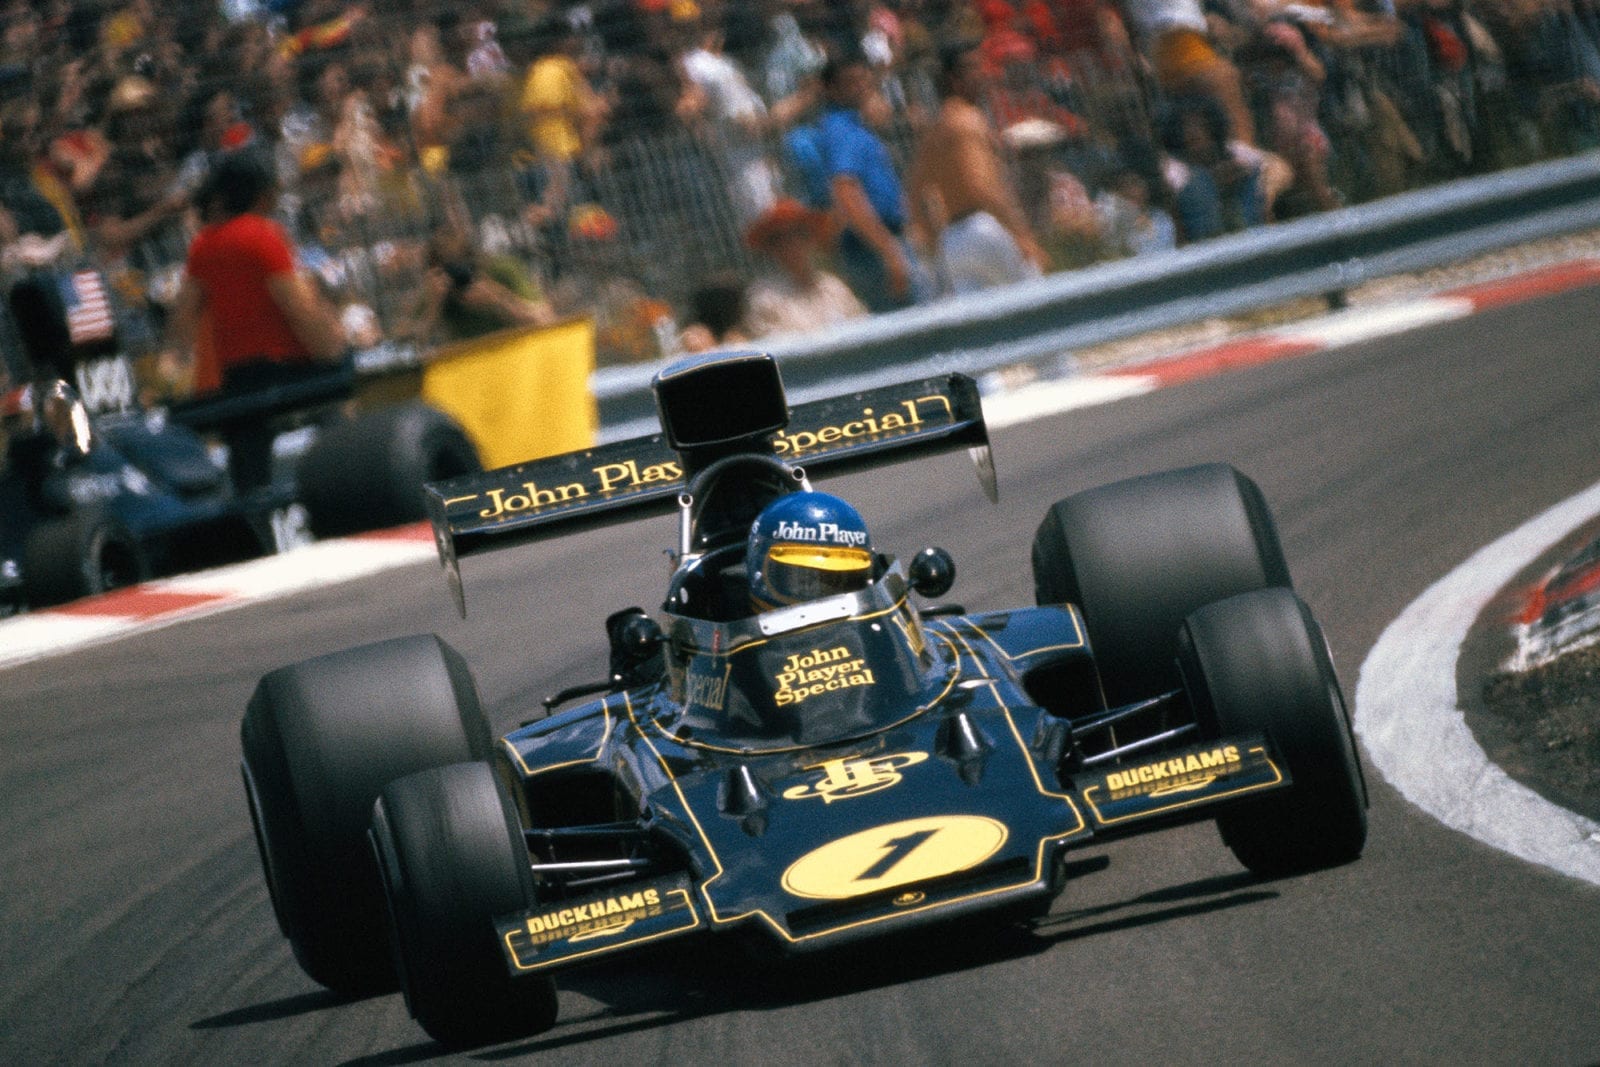 Ronnie Peterson in his Lotus at the 1974 French Grand Prix, Paul Ricard.